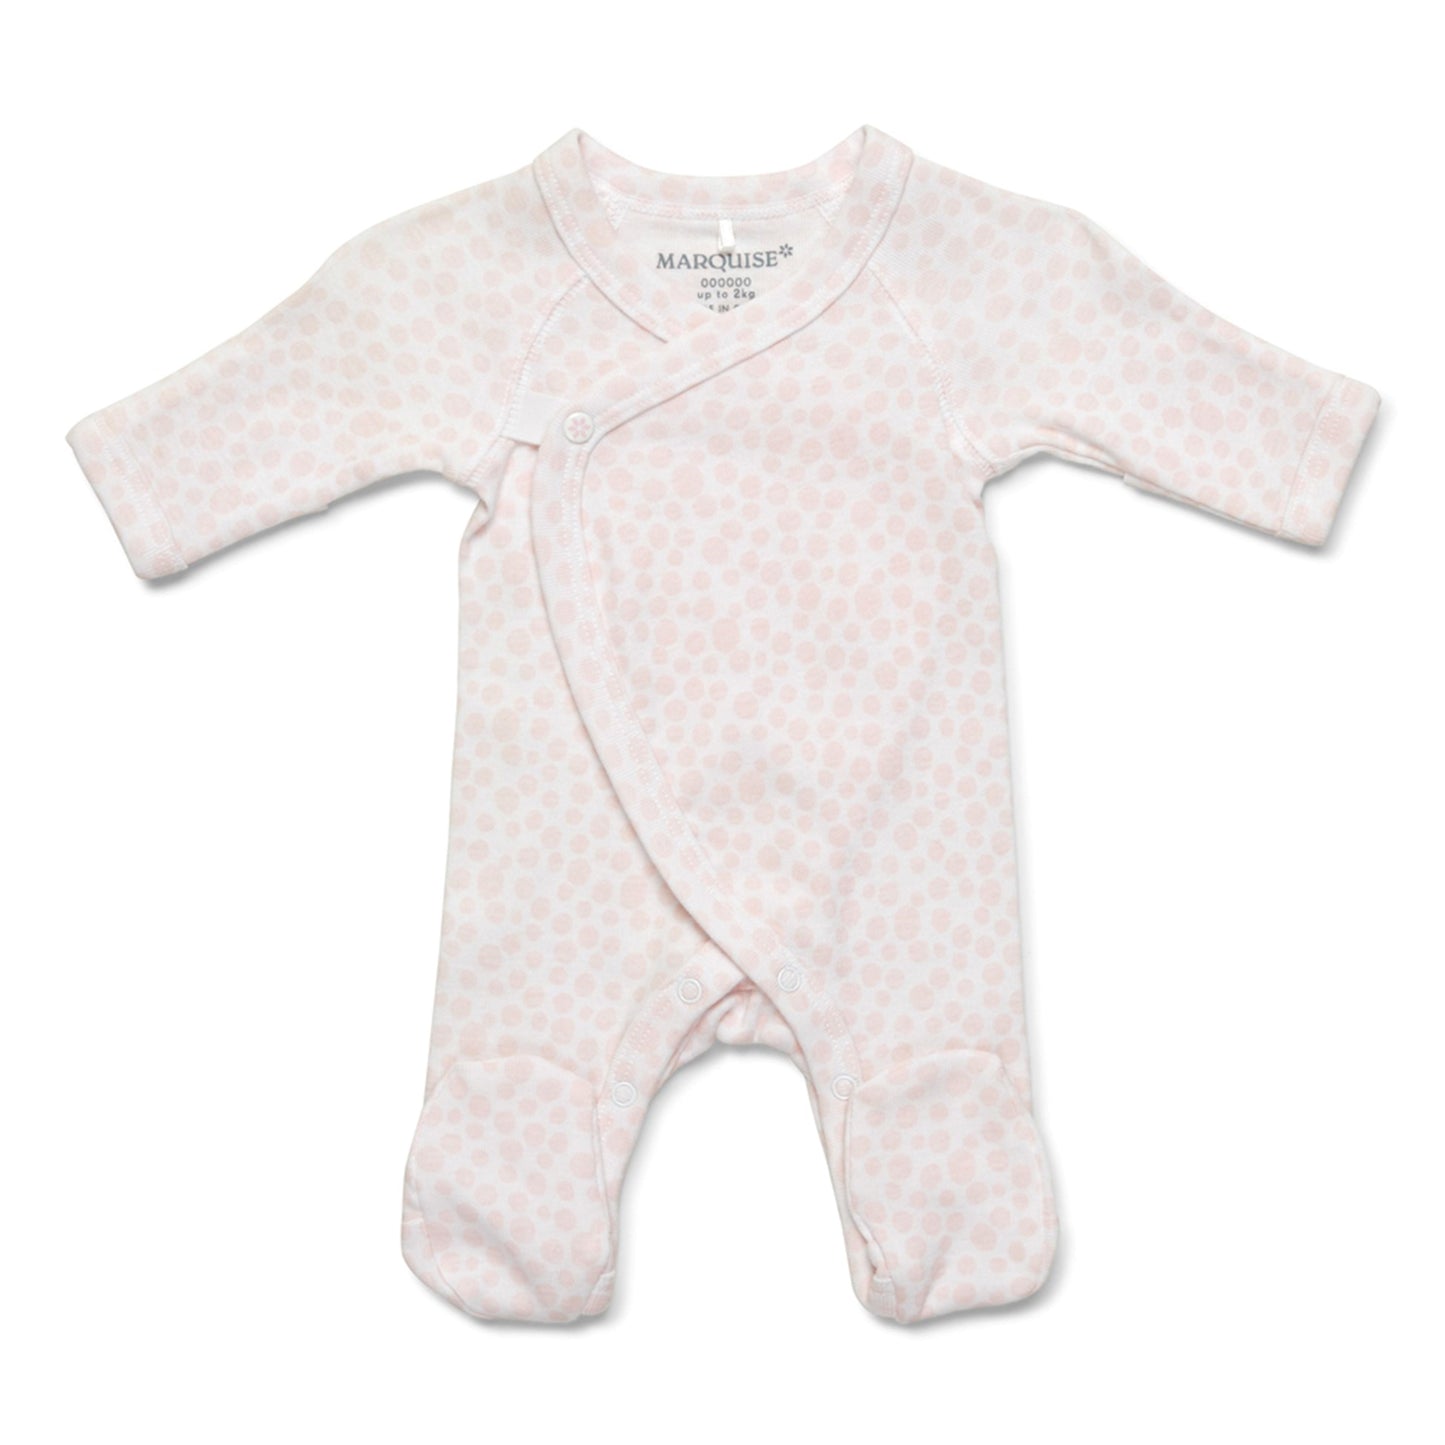 Marquise Premmie Footed Studsuit - Pink Dot